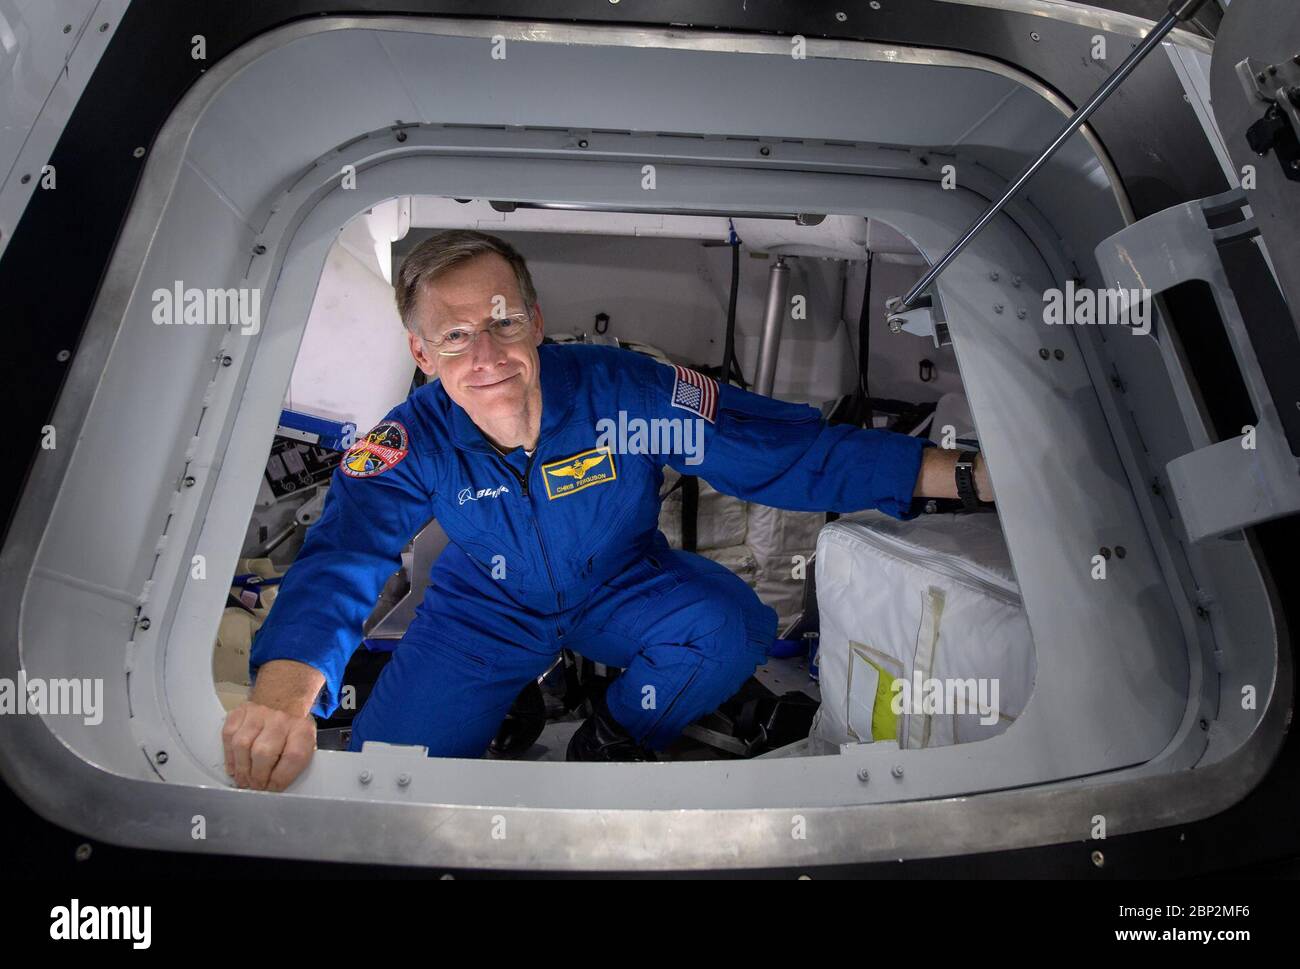 Commercial Crew Program  Boeing astronaut Chris Ferguson poses for a photograph as he exits the Boeing Mockup Trainer at NASA’s Johnson Space Center in Houston, Texas on Aug. 2, 2018 ahead of the commercial crew flight assignments announcement Aug. 3. Ferguson, along with NASA astronauts Eric Boe and Nicole Aunapu Mann were assigned to launch aboard Boeing’s CST-100 Starliner on the company’s Crew Flight Test targeted for mid-2019 in partnership with NASA’s Commercial Crew Program. Stock Photo